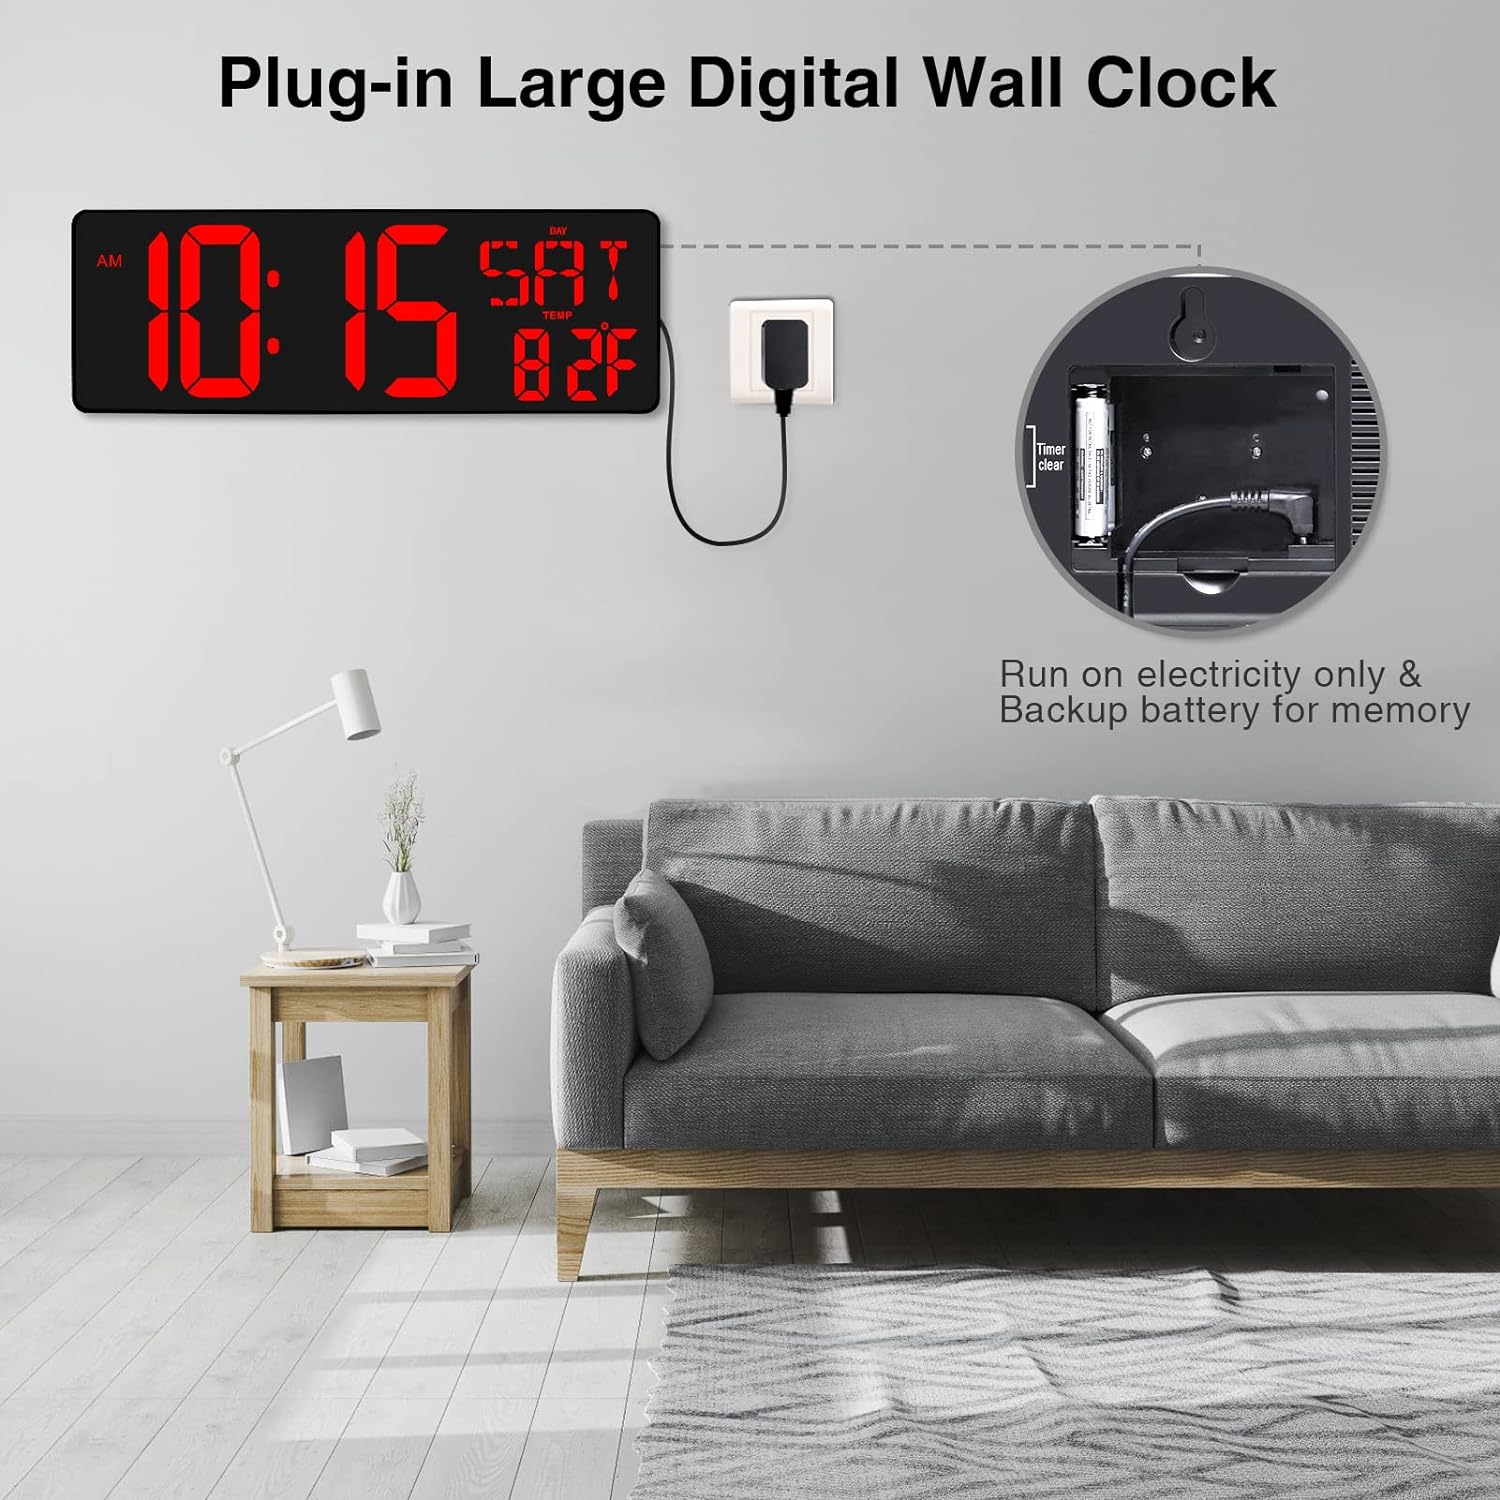 Countdown Clock Indoor Sports Meter 1 Inch Digital Real Time Clock Multi-Function Hospital Timer Large Wall-Mounted Office Countdown with Remote Control is Very Suitable for Classroom Office Hospital